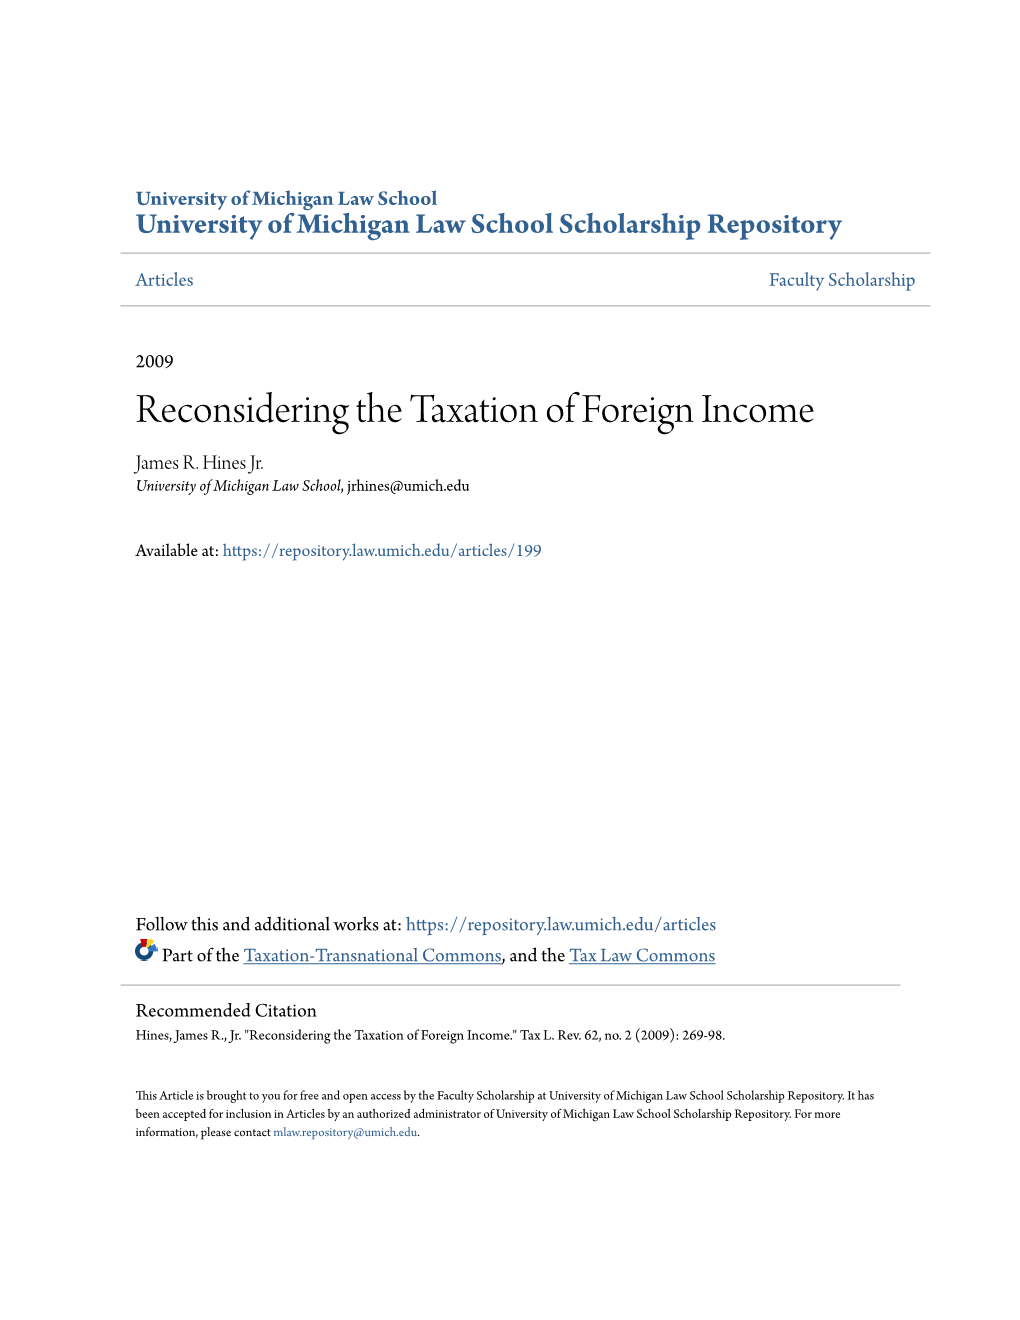 Reconsidering the Taxation of Foreign Income James R